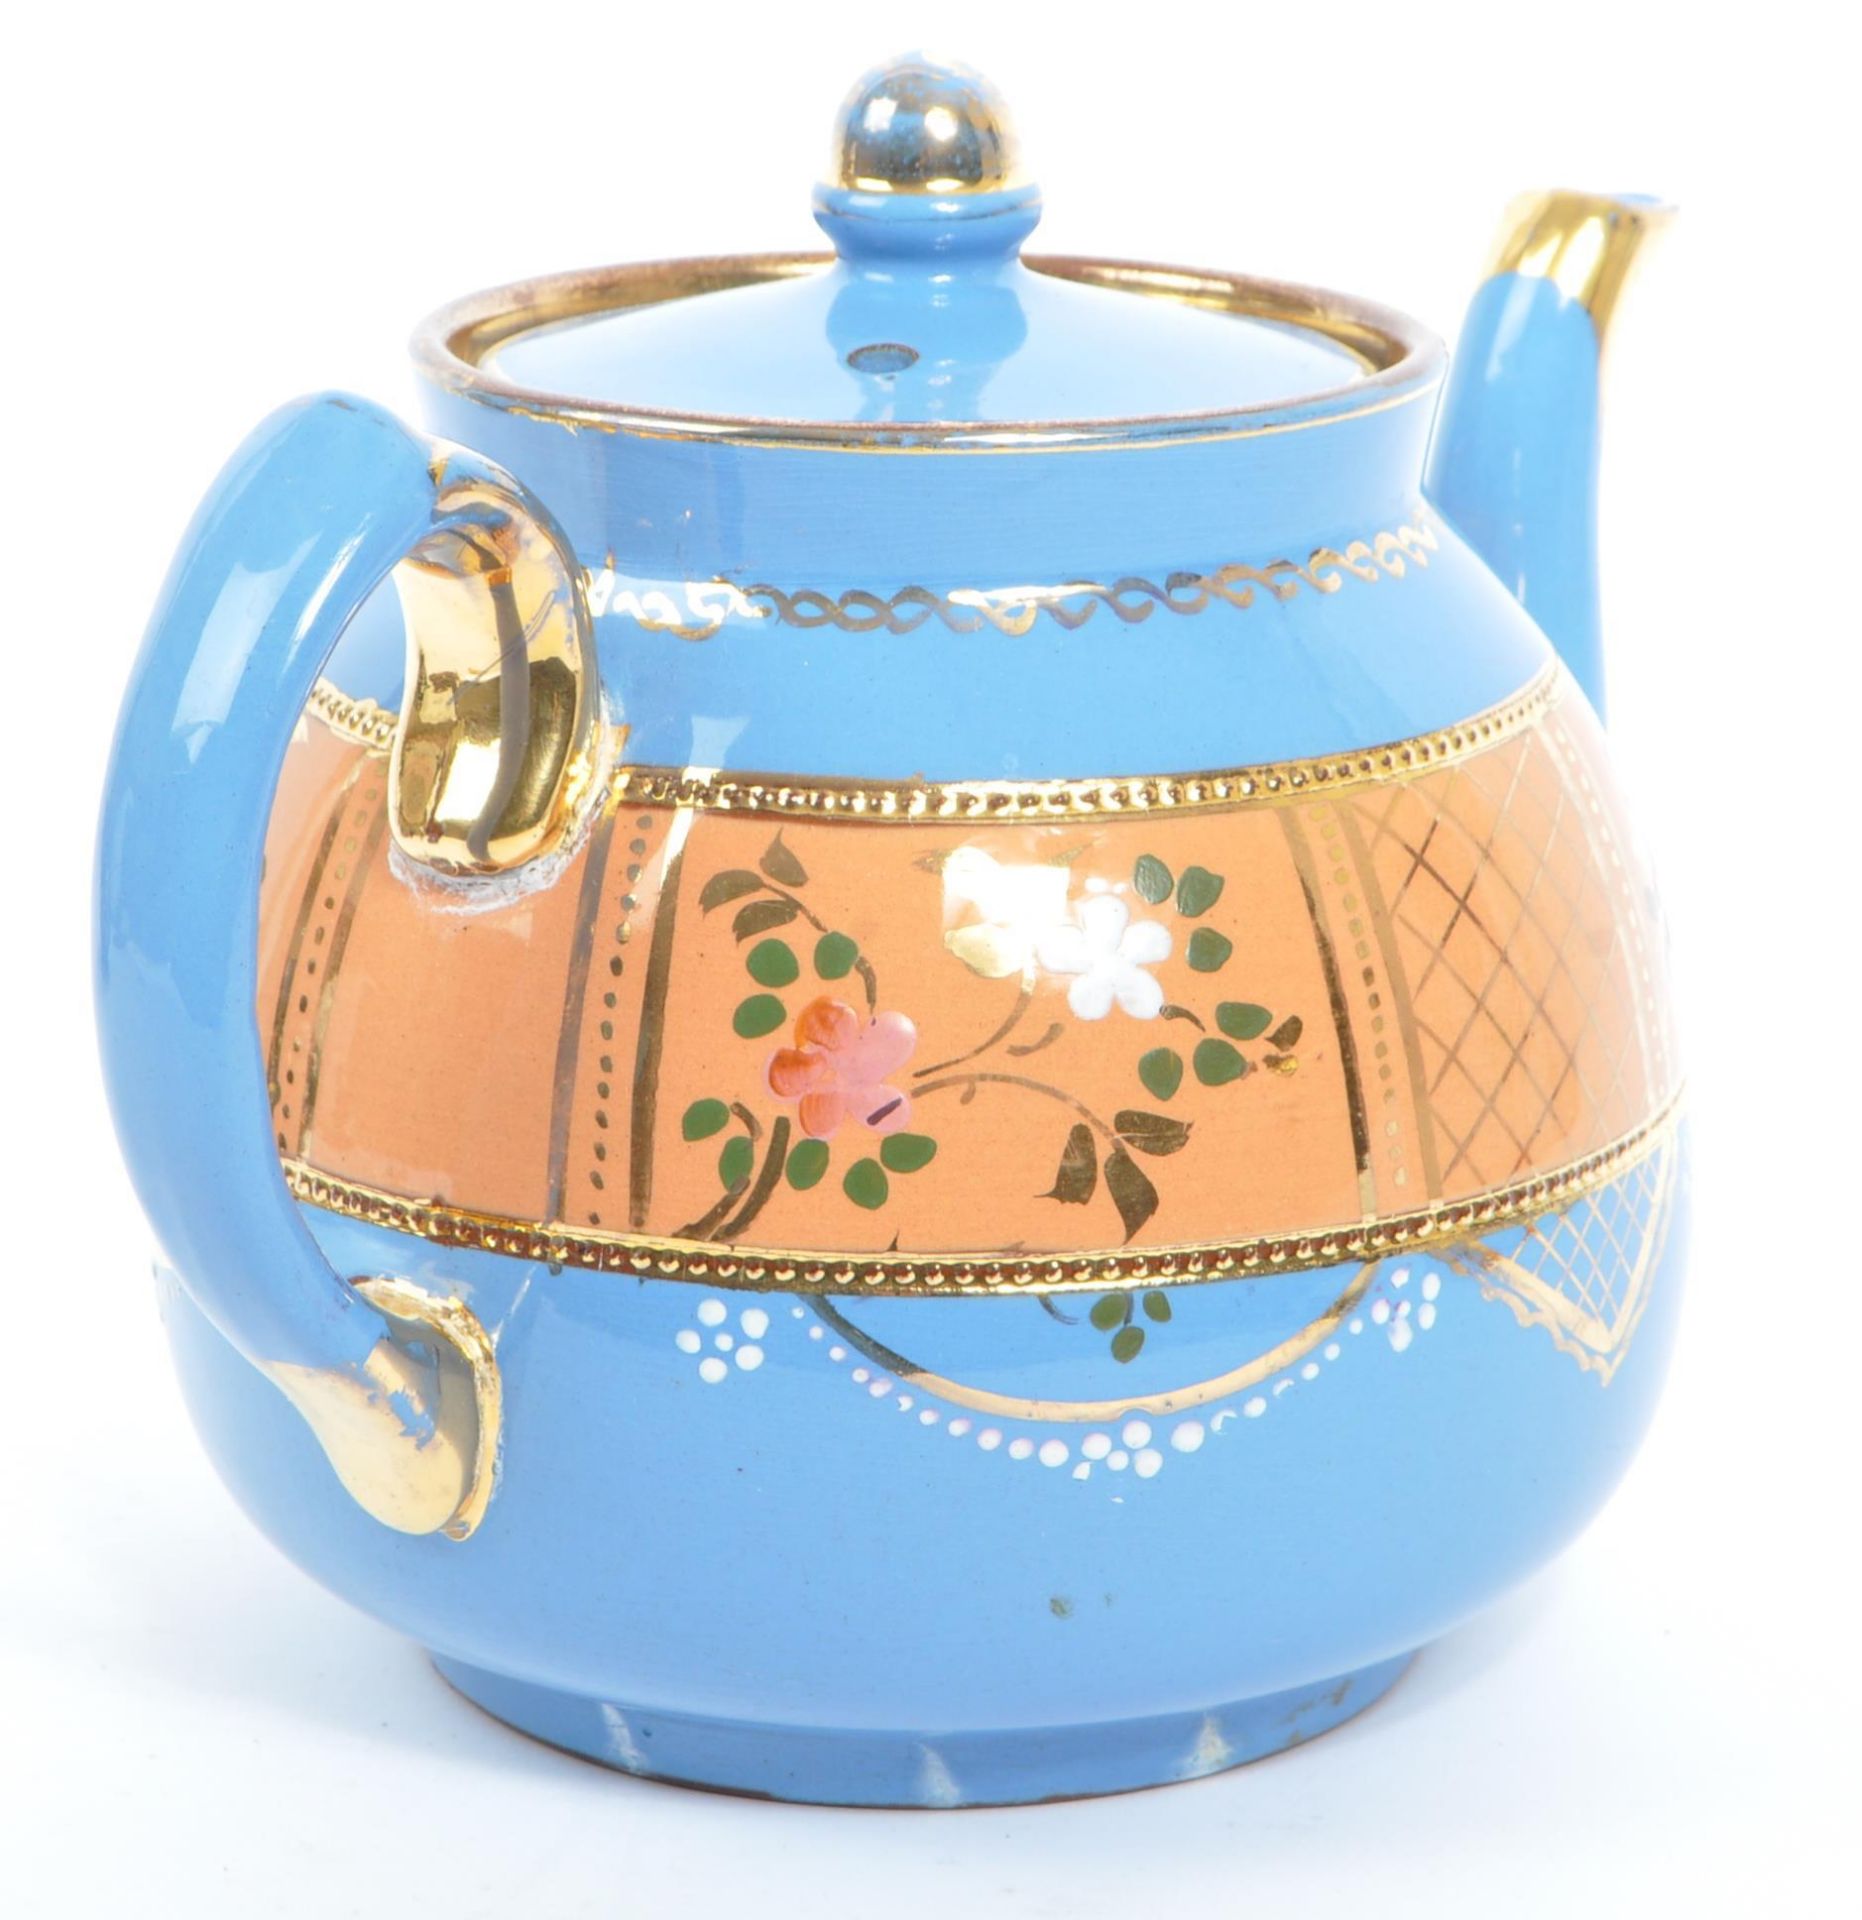 WADES - TWO HAND PAINTED DECORATED CERAMIC TEAPOTS - Image 3 of 8